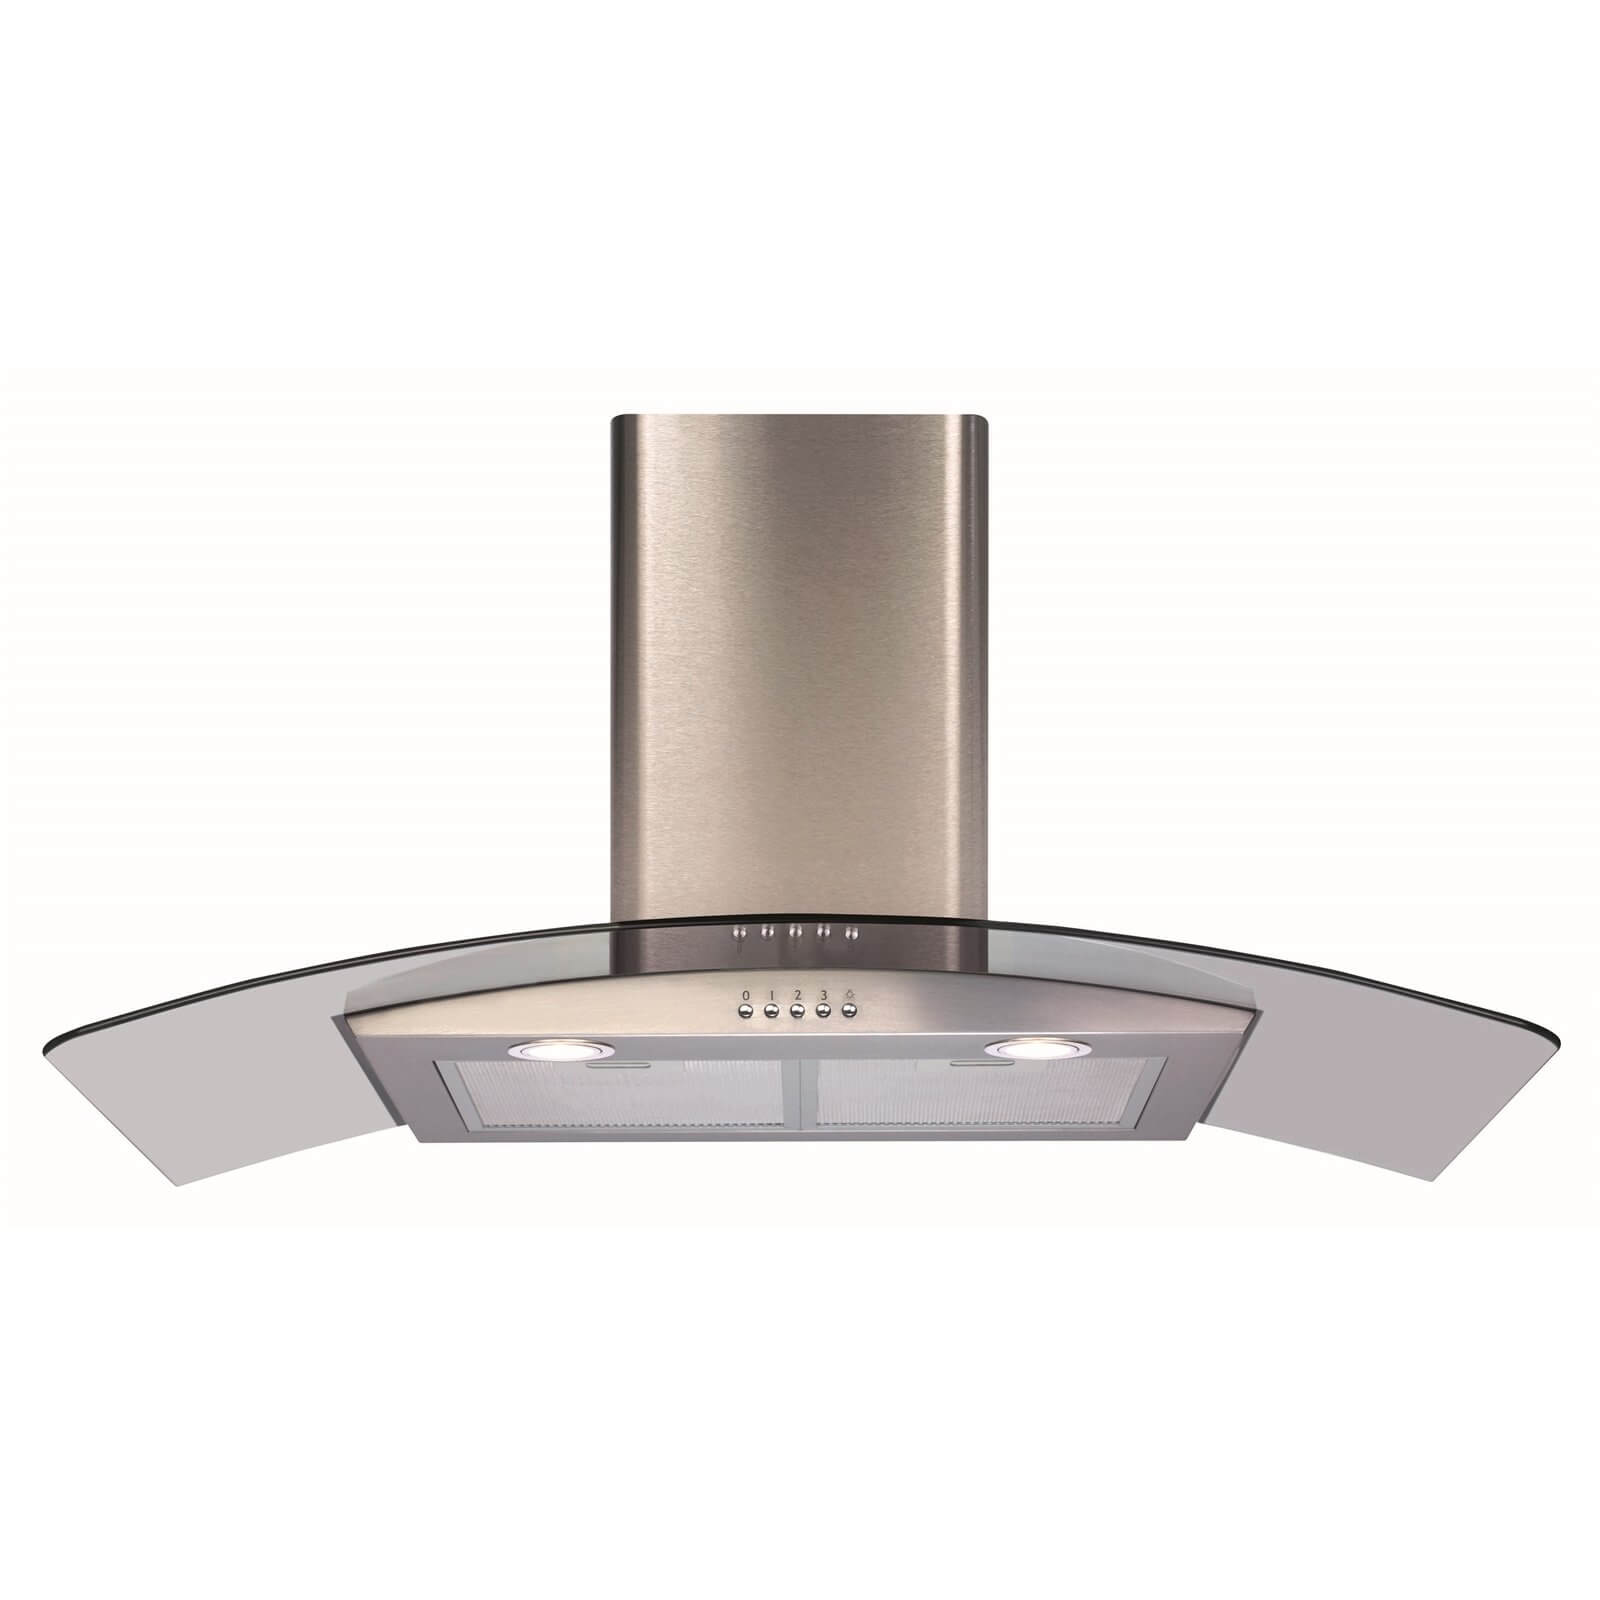 CDA ECP92SS Curved Glass Chimney Cooker Hood - 90cm - Stainless Steel